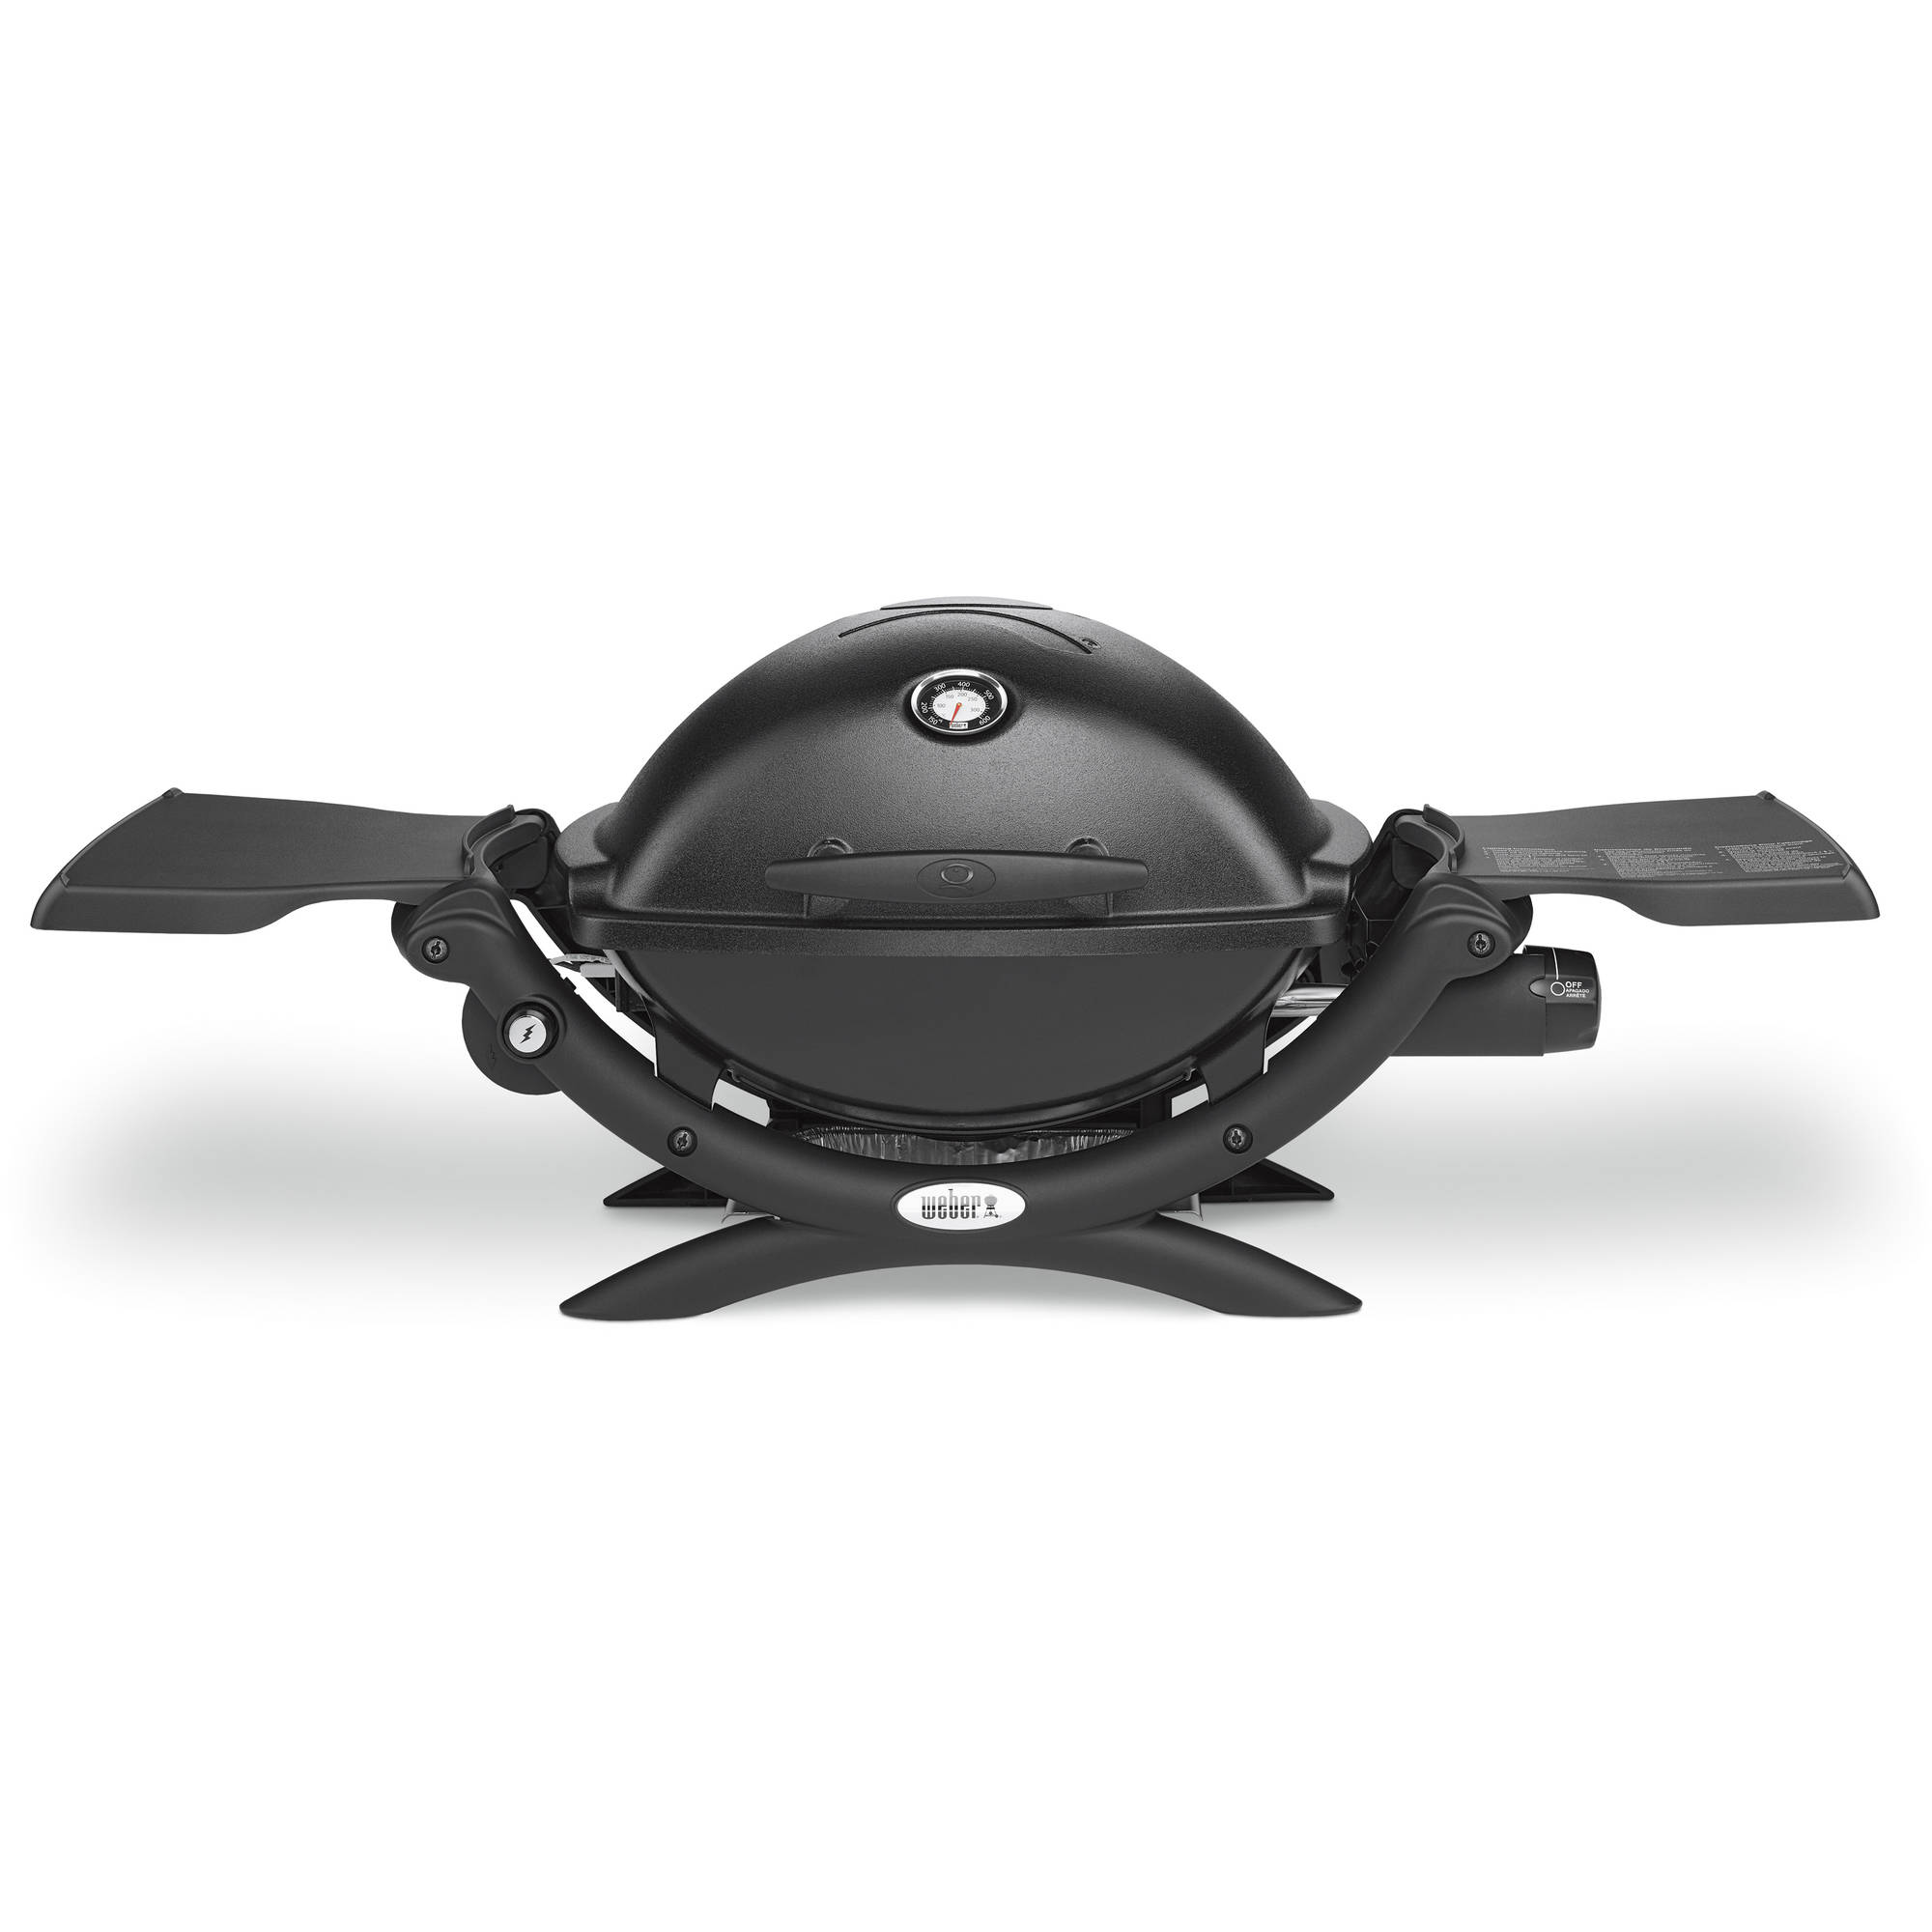 Weber Q-1200 Portable Gas Grill - image 1 of 3